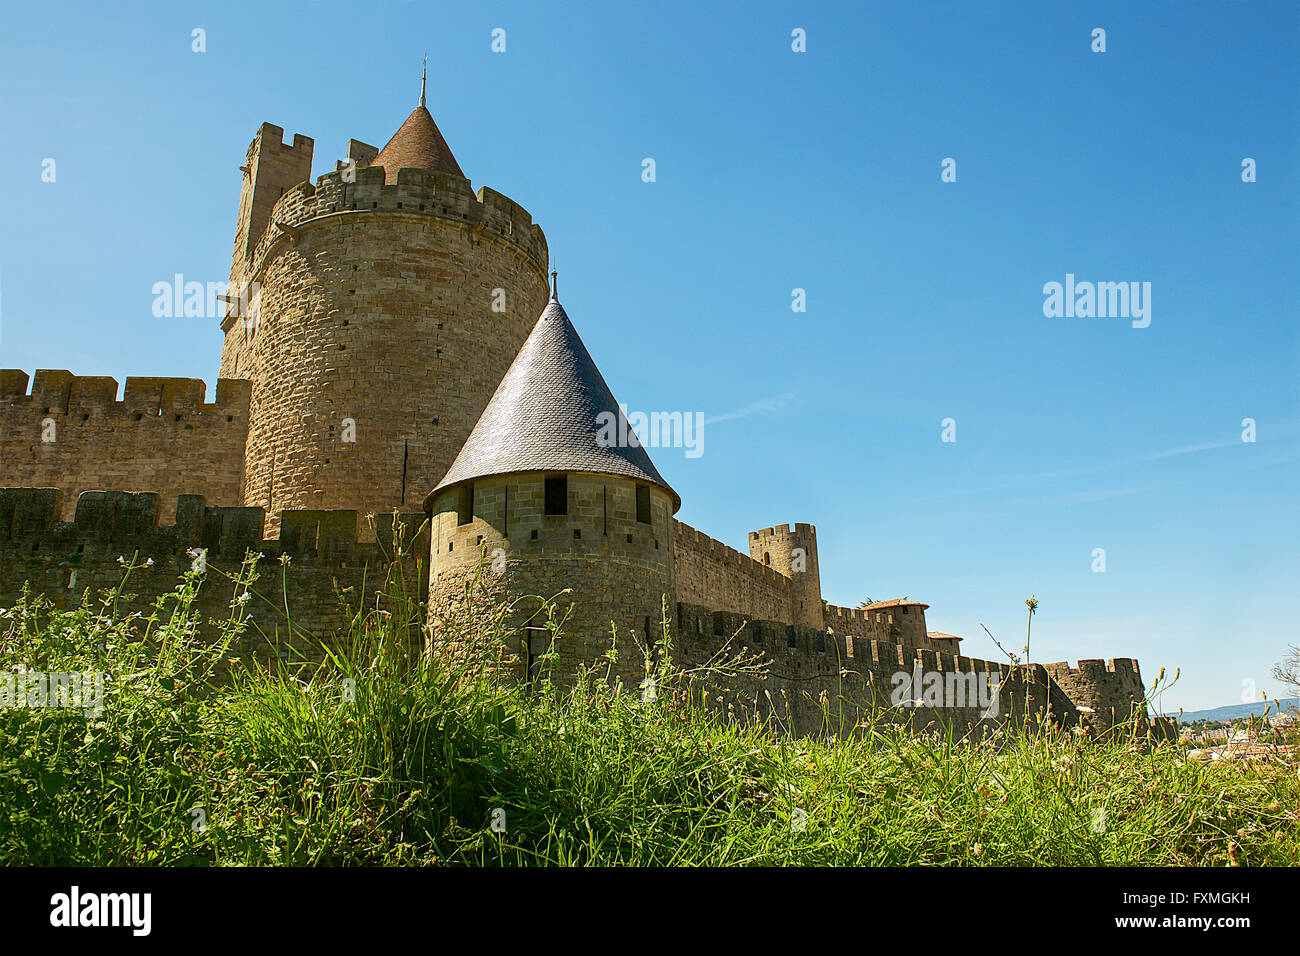 The Walled Town of Carcassonne, Carcassonne, France Stock Photo